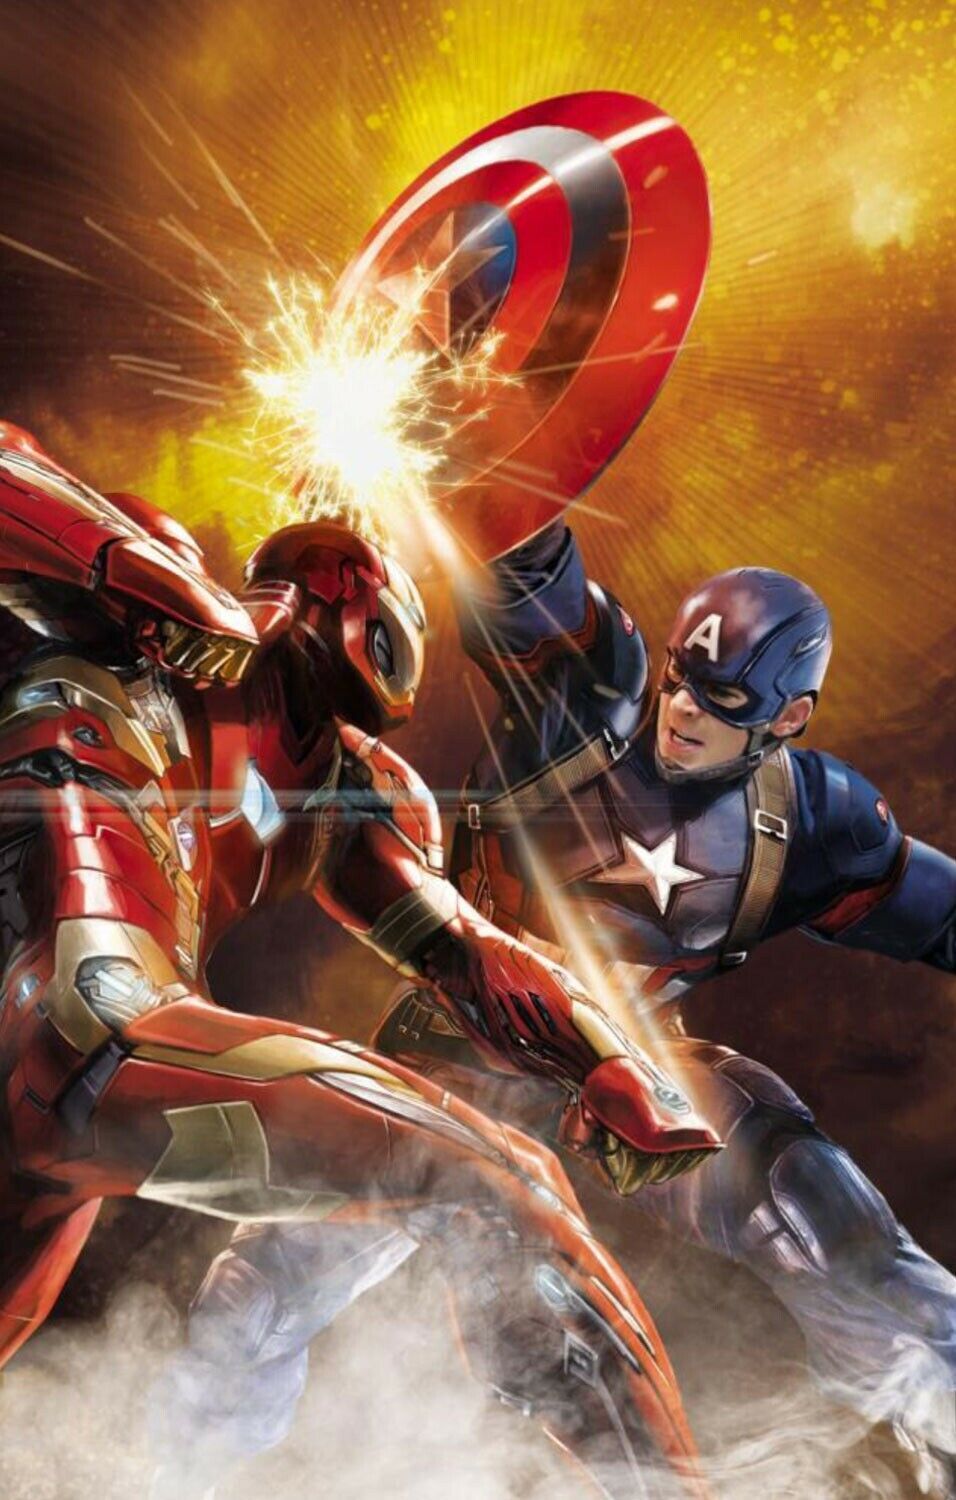 Iron Man and Captain America creating sparks as they battle, with each other.